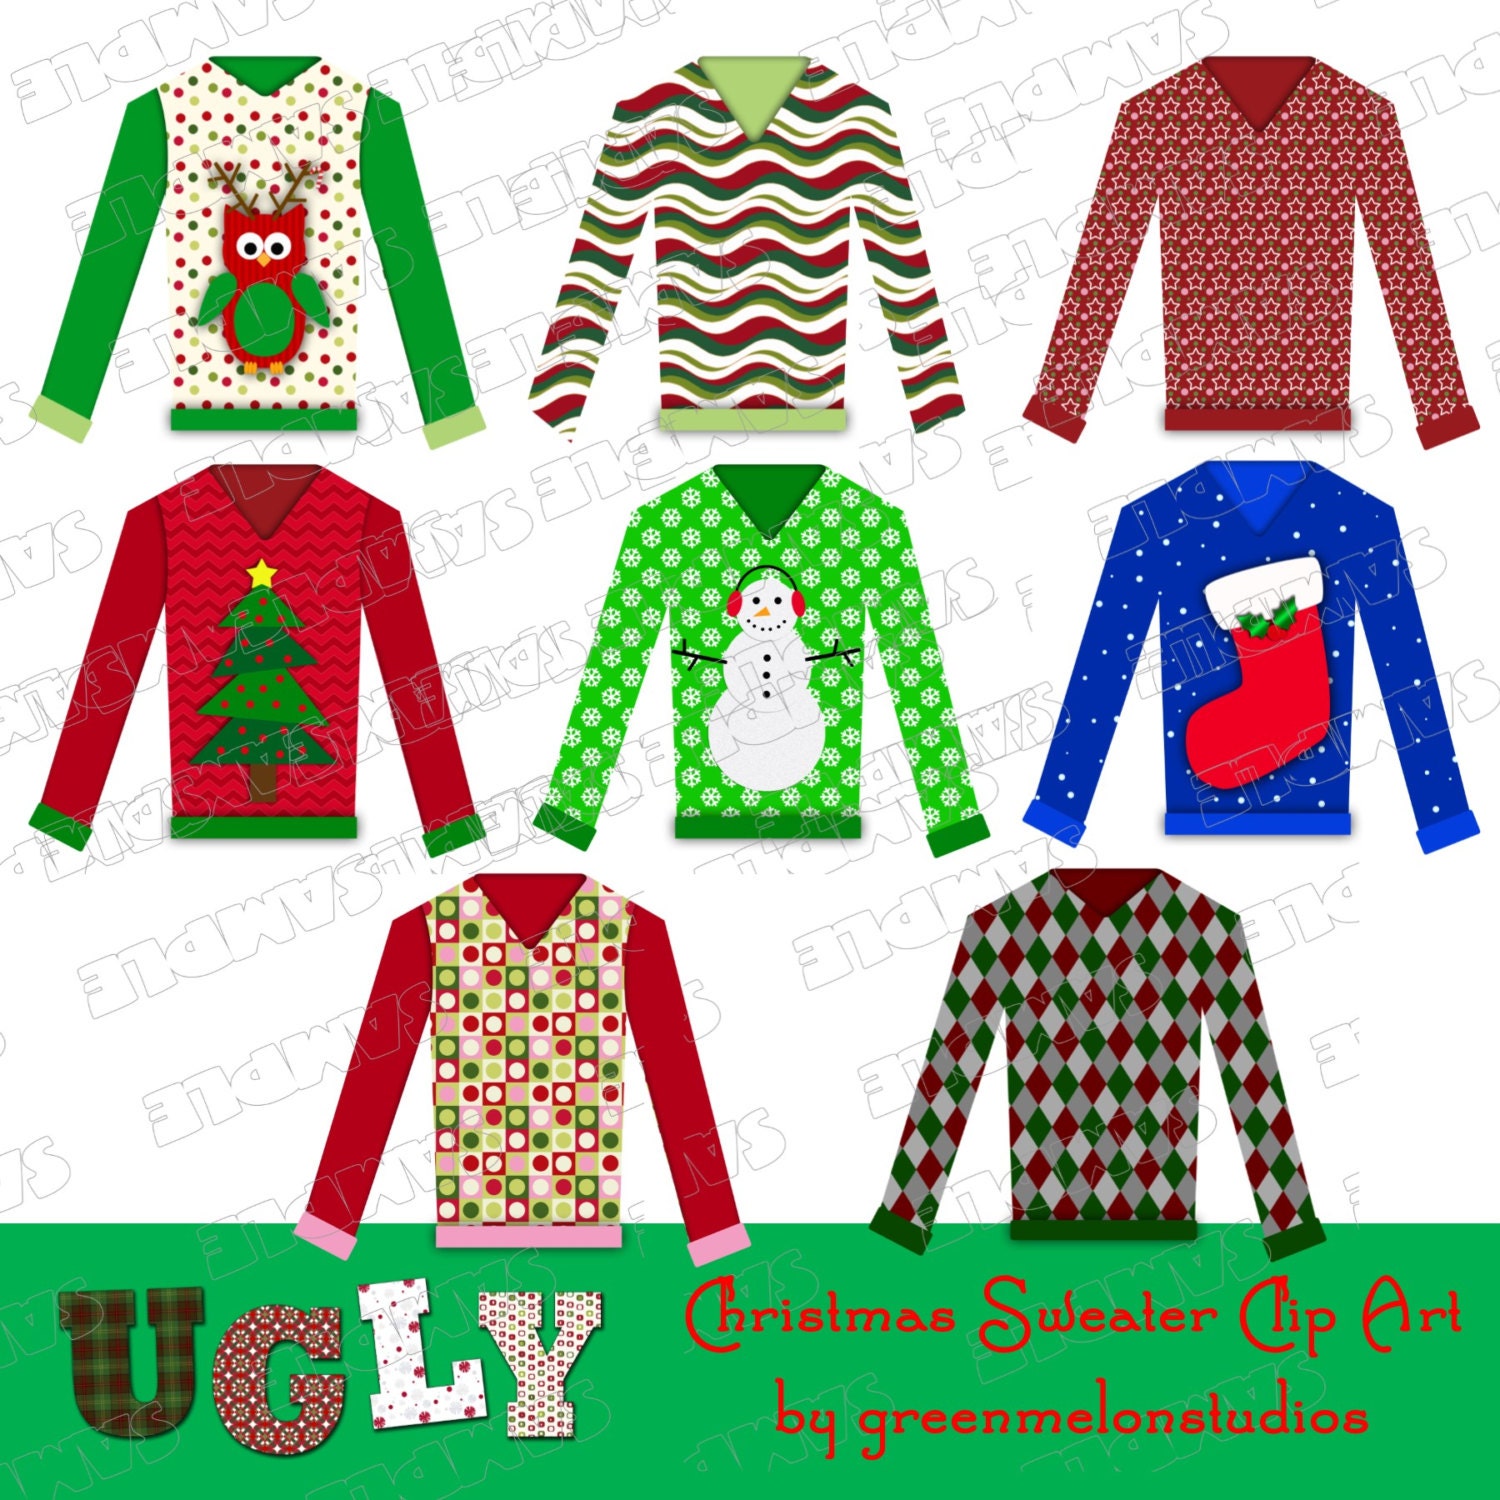 Ugly Christmas Sweater Party Clipart and by greenmelonstudios